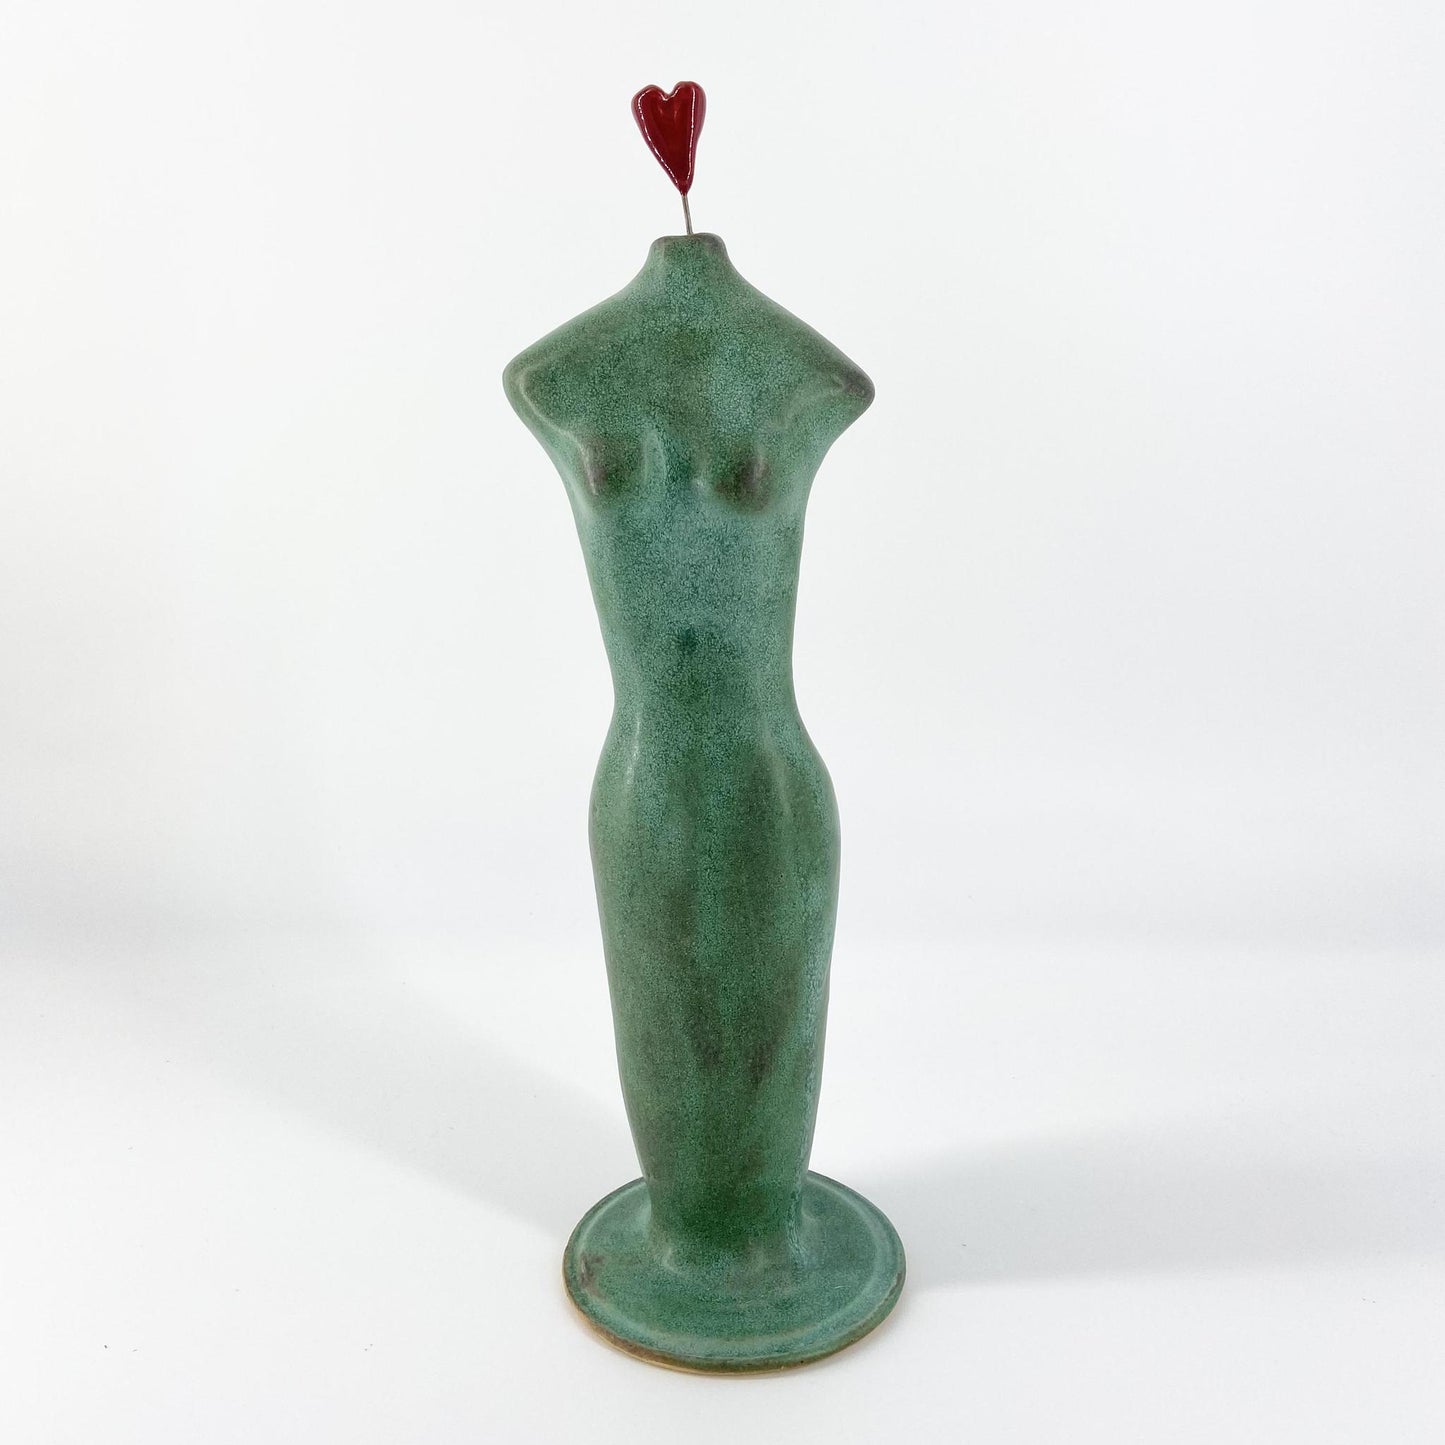 Sculpture - Female Form With Heart - Ceramic